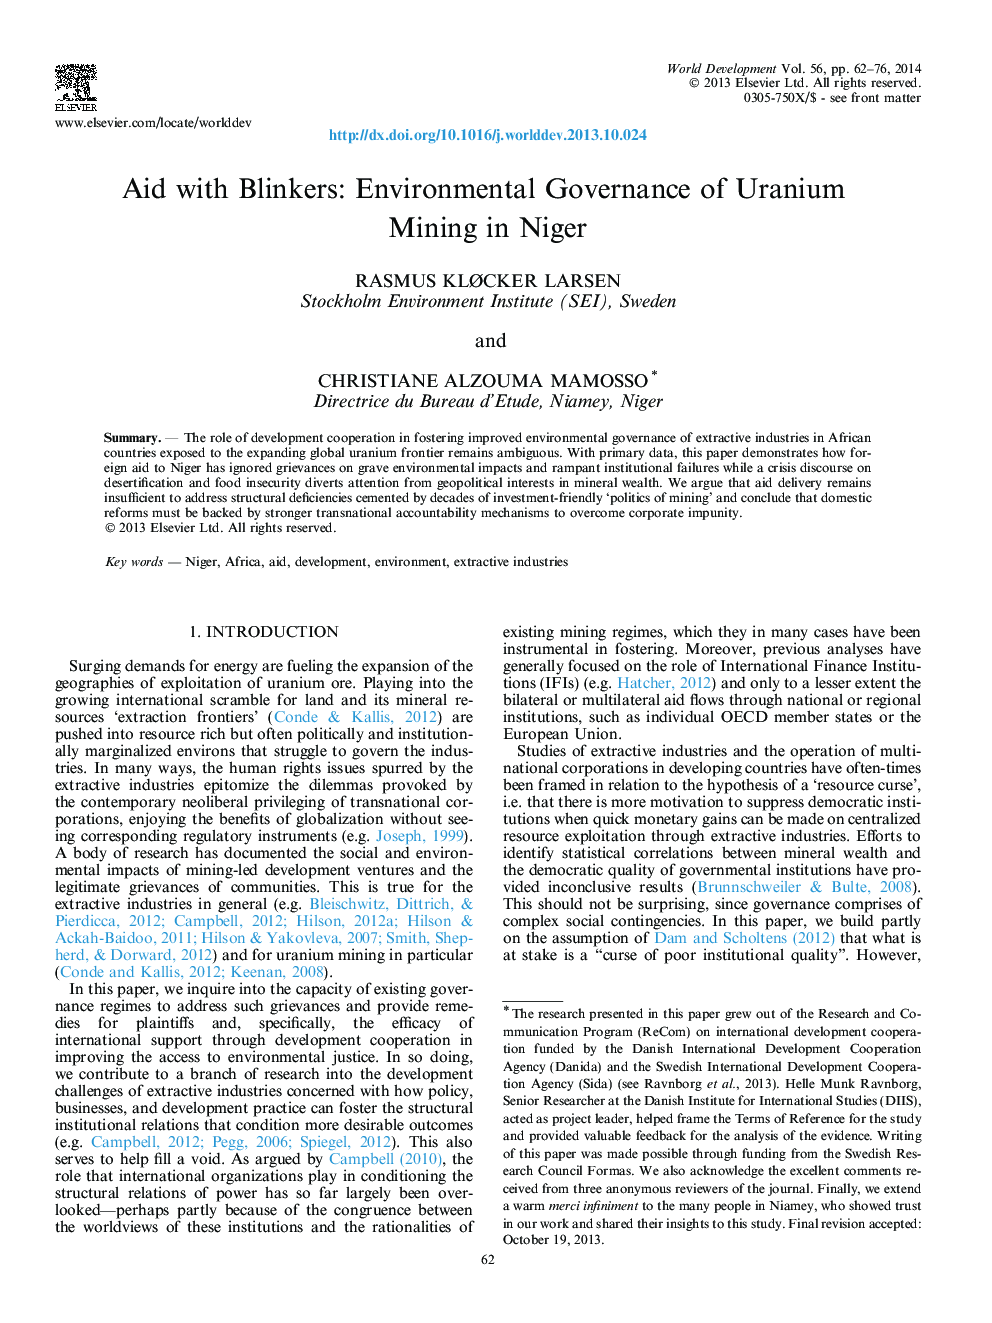 Aid with Blinkers: Environmental Governance of Uranium Mining in Niger